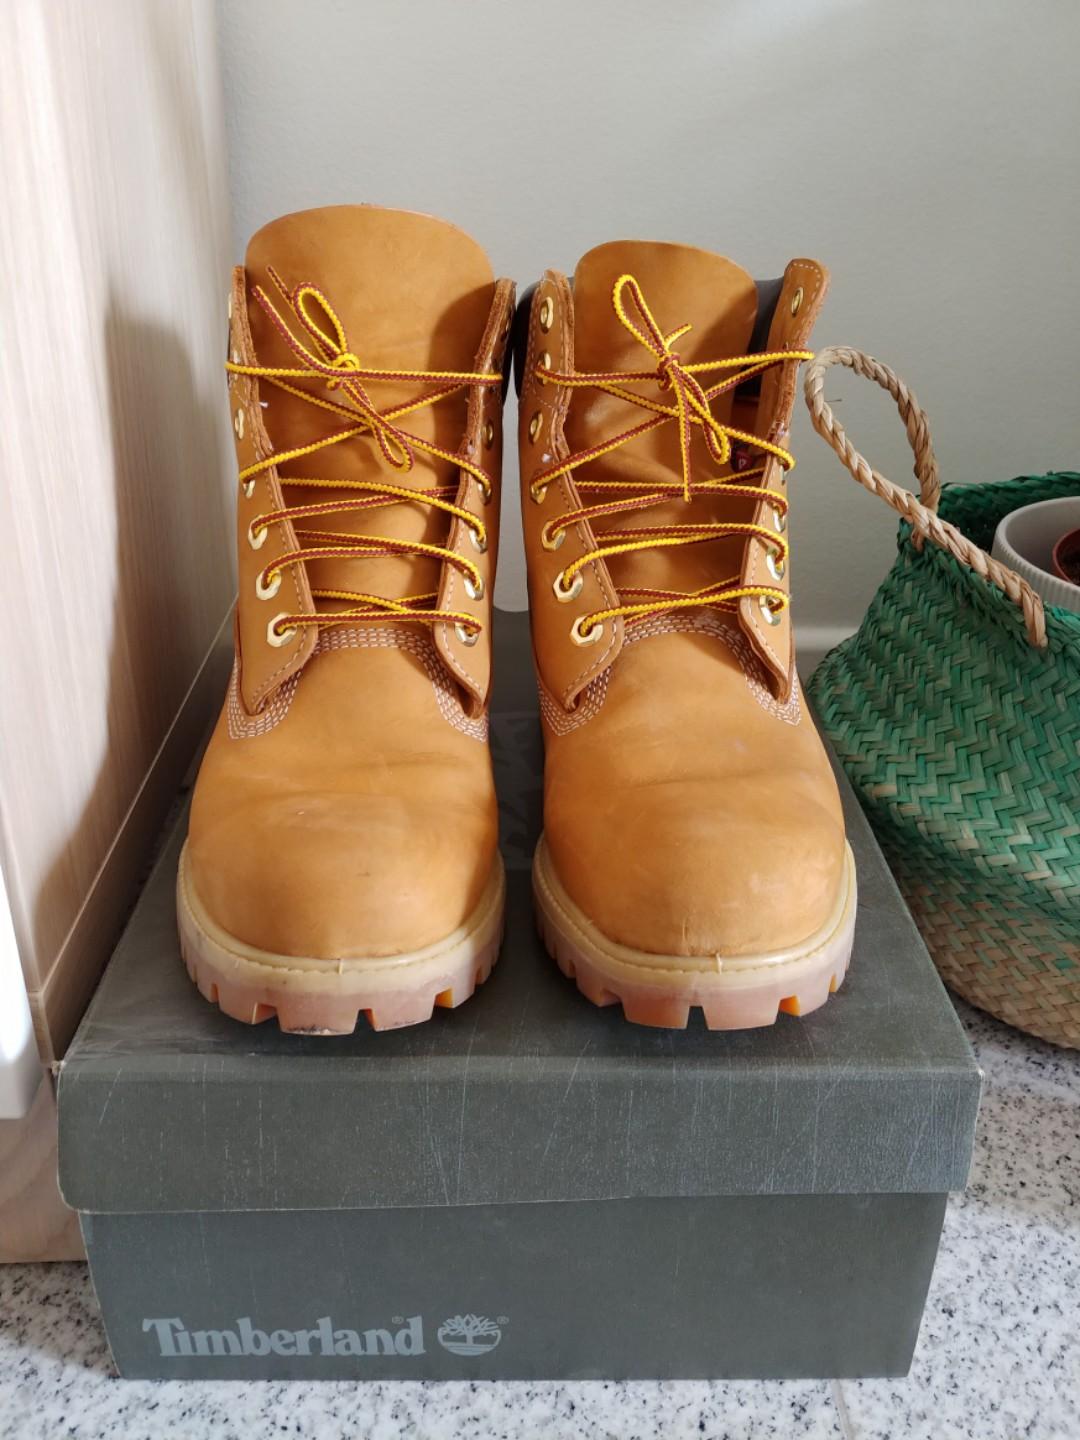 Classic Timberland Boots, Men's Fashion 